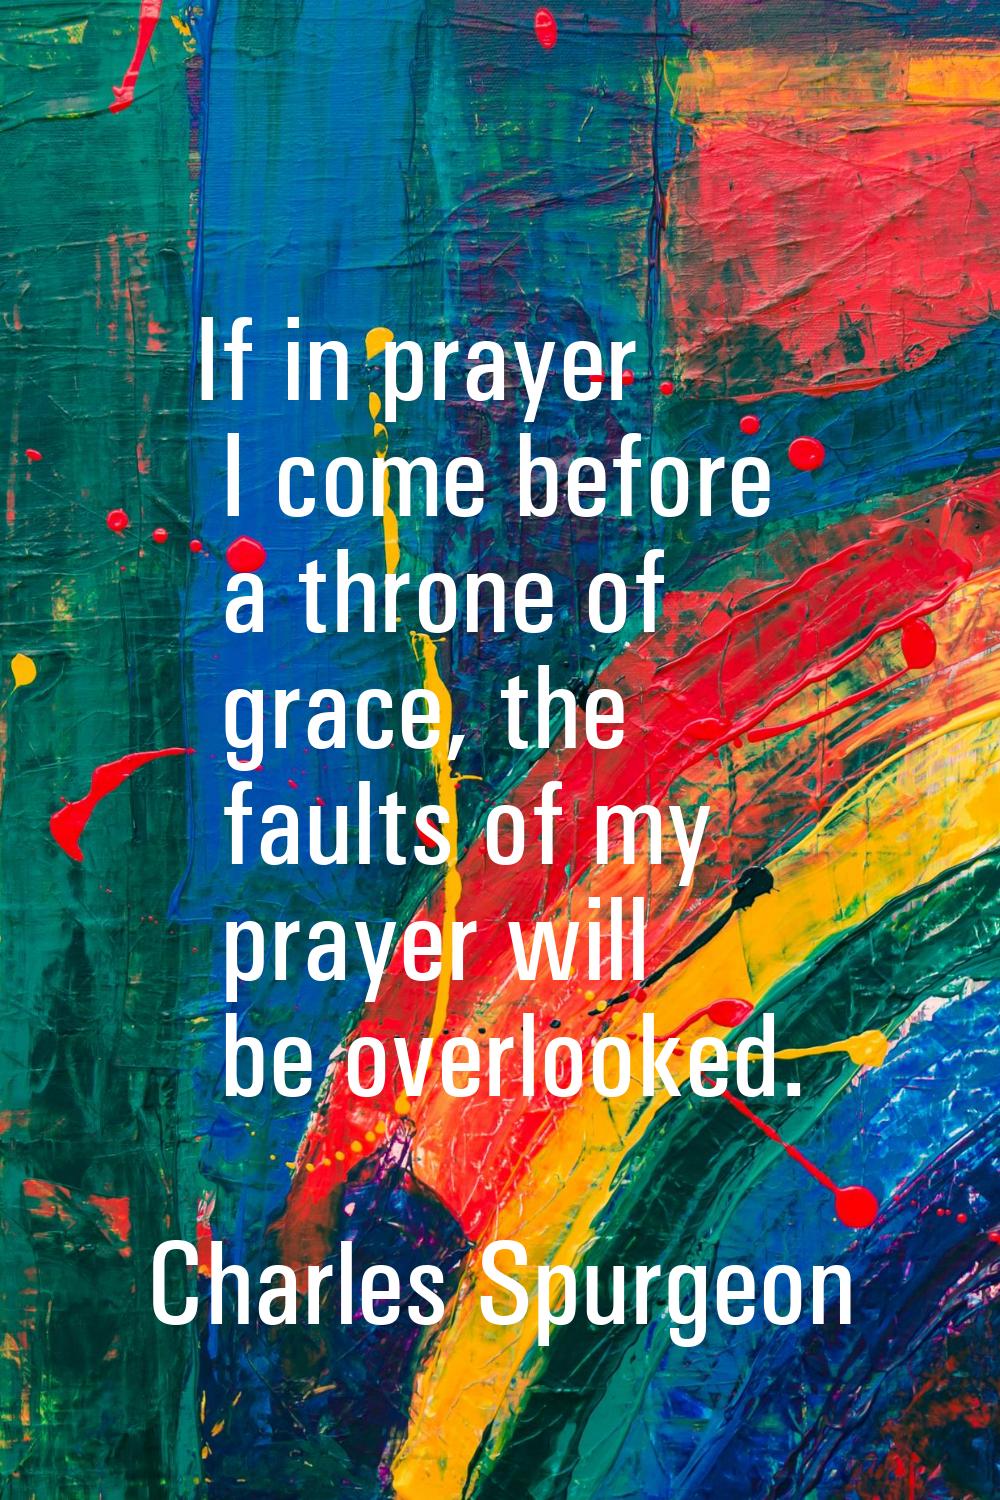 If in prayer I come before a throne of grace, the faults of my prayer will be overlooked.